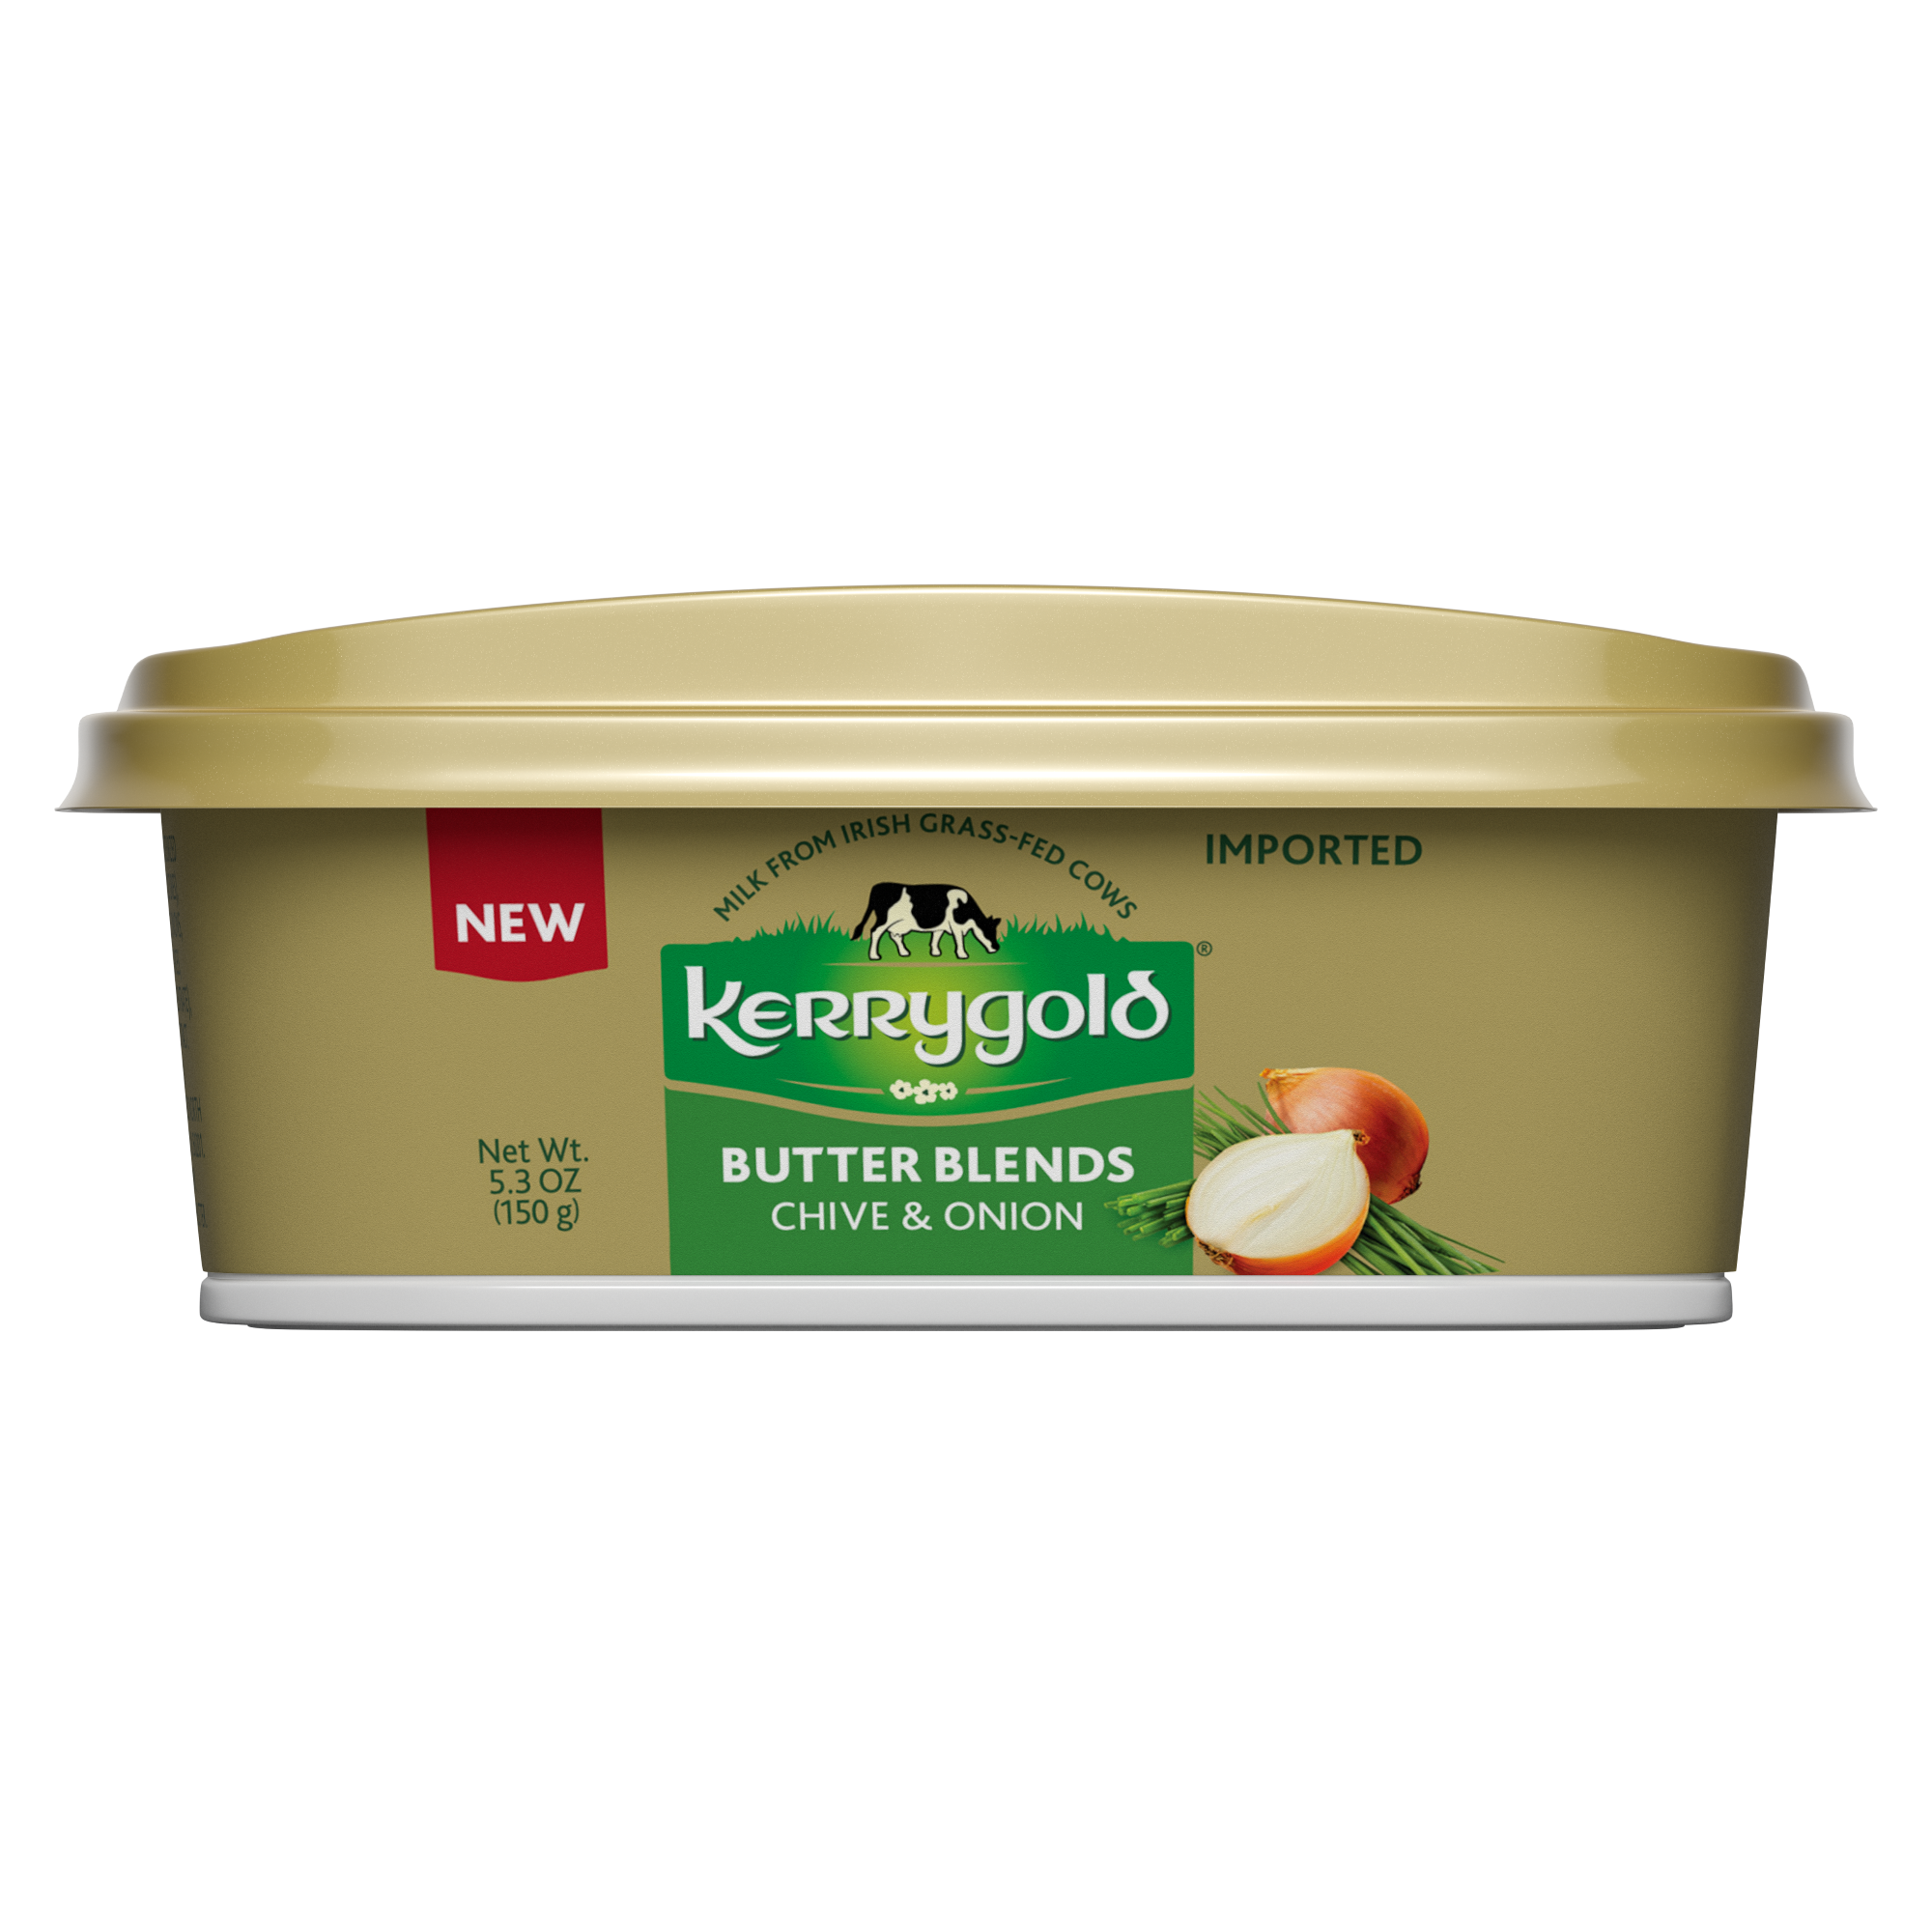 Kerrygold Chive & Onion Butter Blends